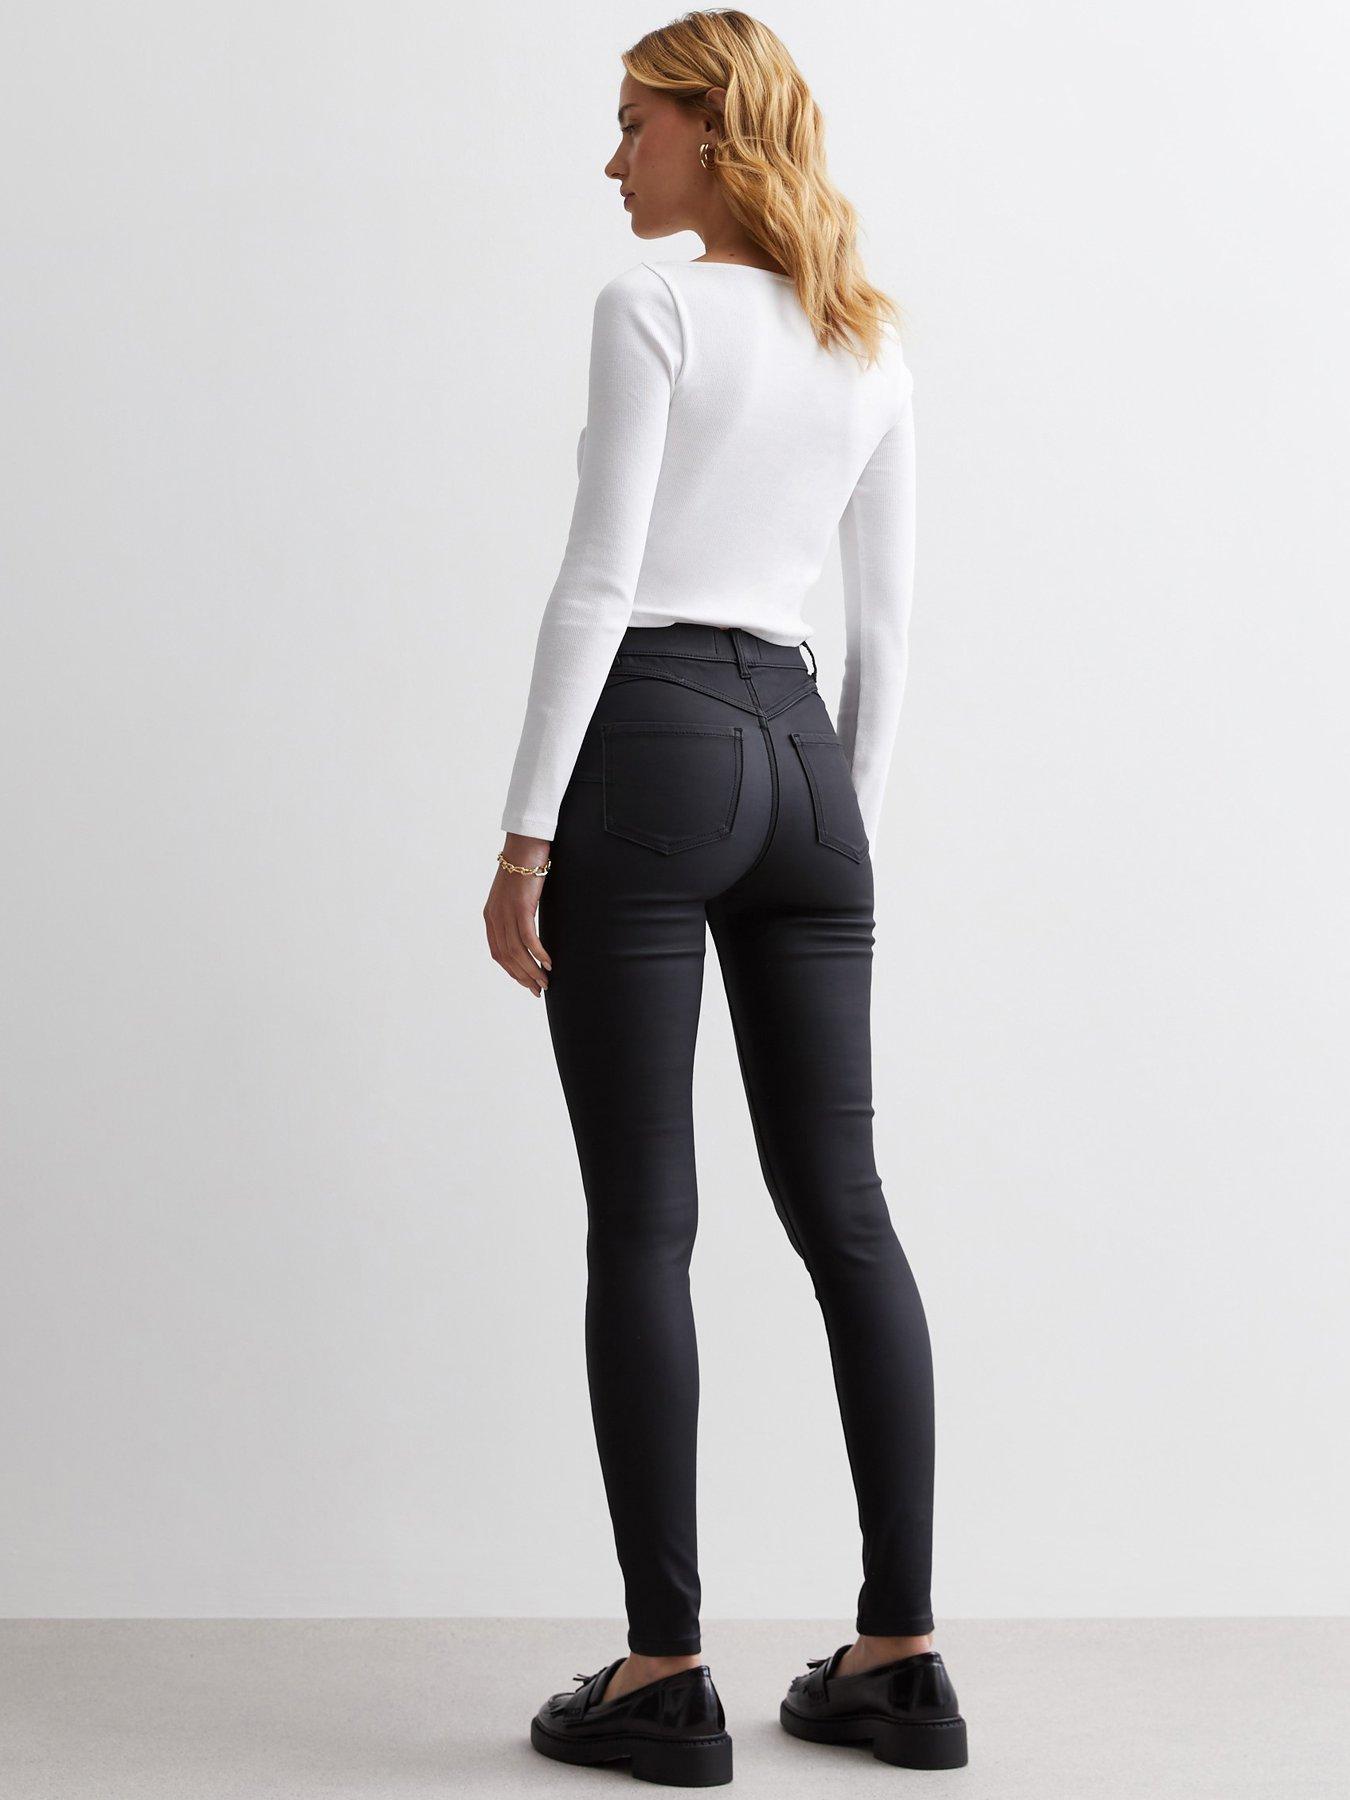 New Look Curves Black Coated Leather-Look Mid Rise Lift & Shape Emilee  Jeggings